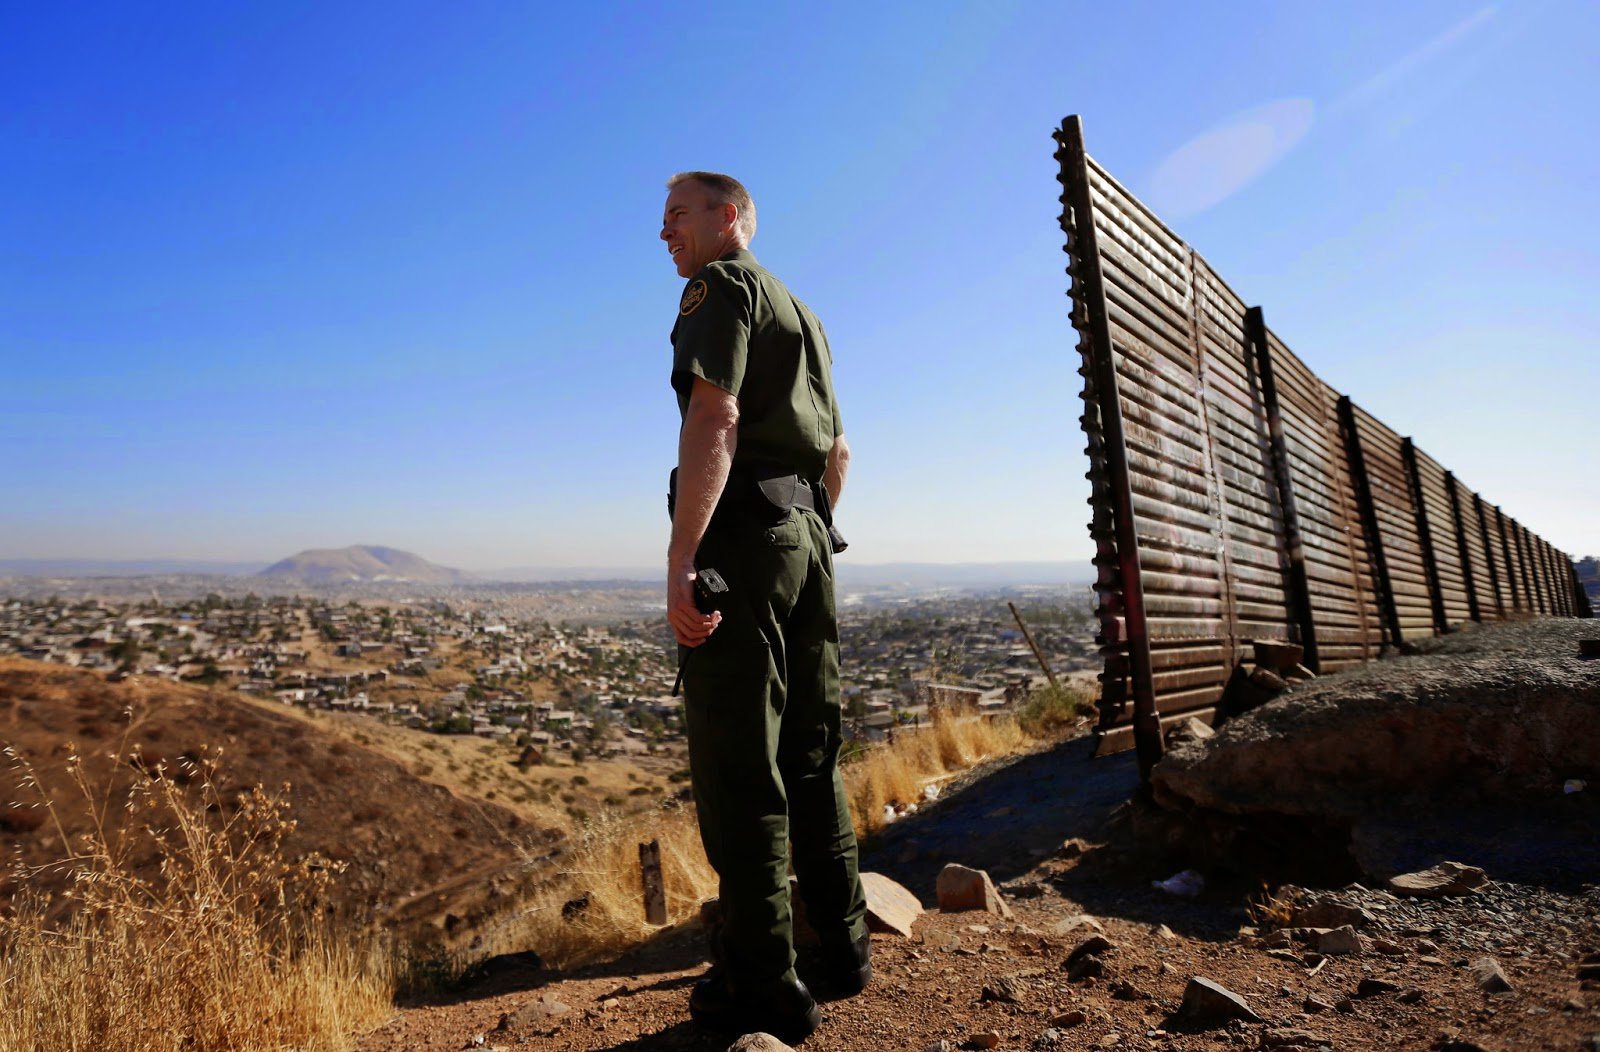 Illegal immigration and border security - will a wall work?